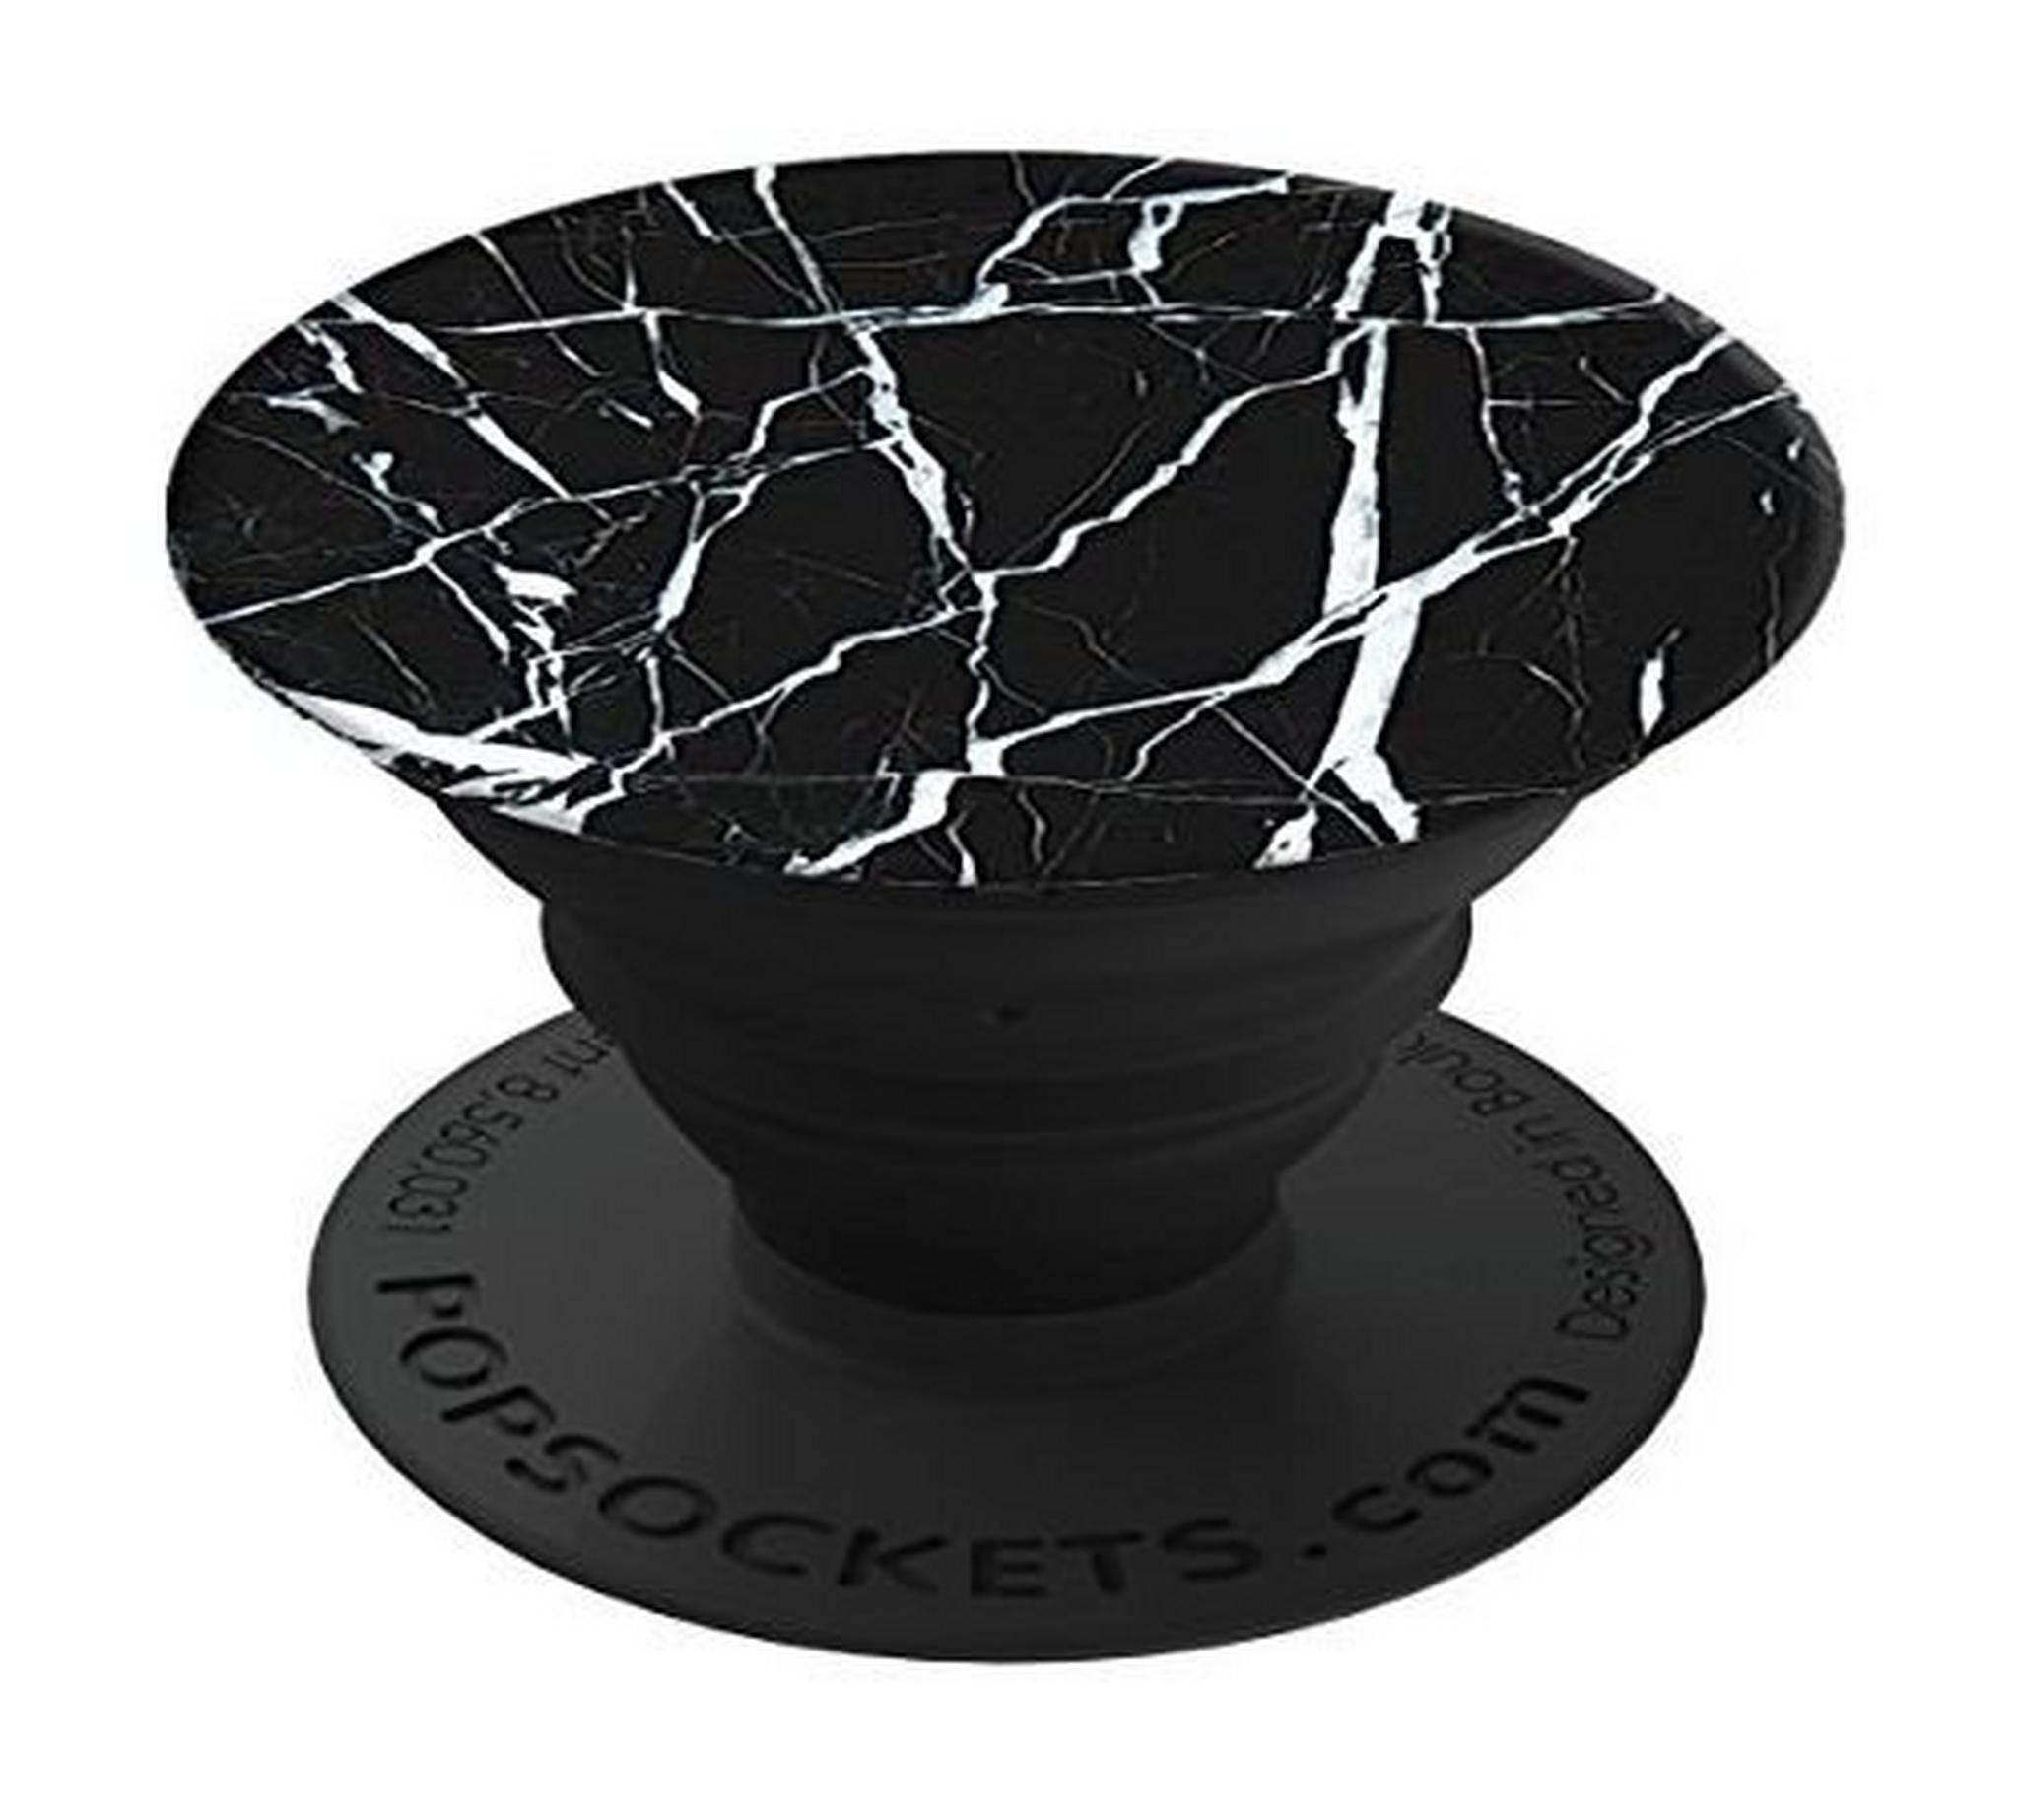 Popsockets Phone Stand and Grip Marble Black